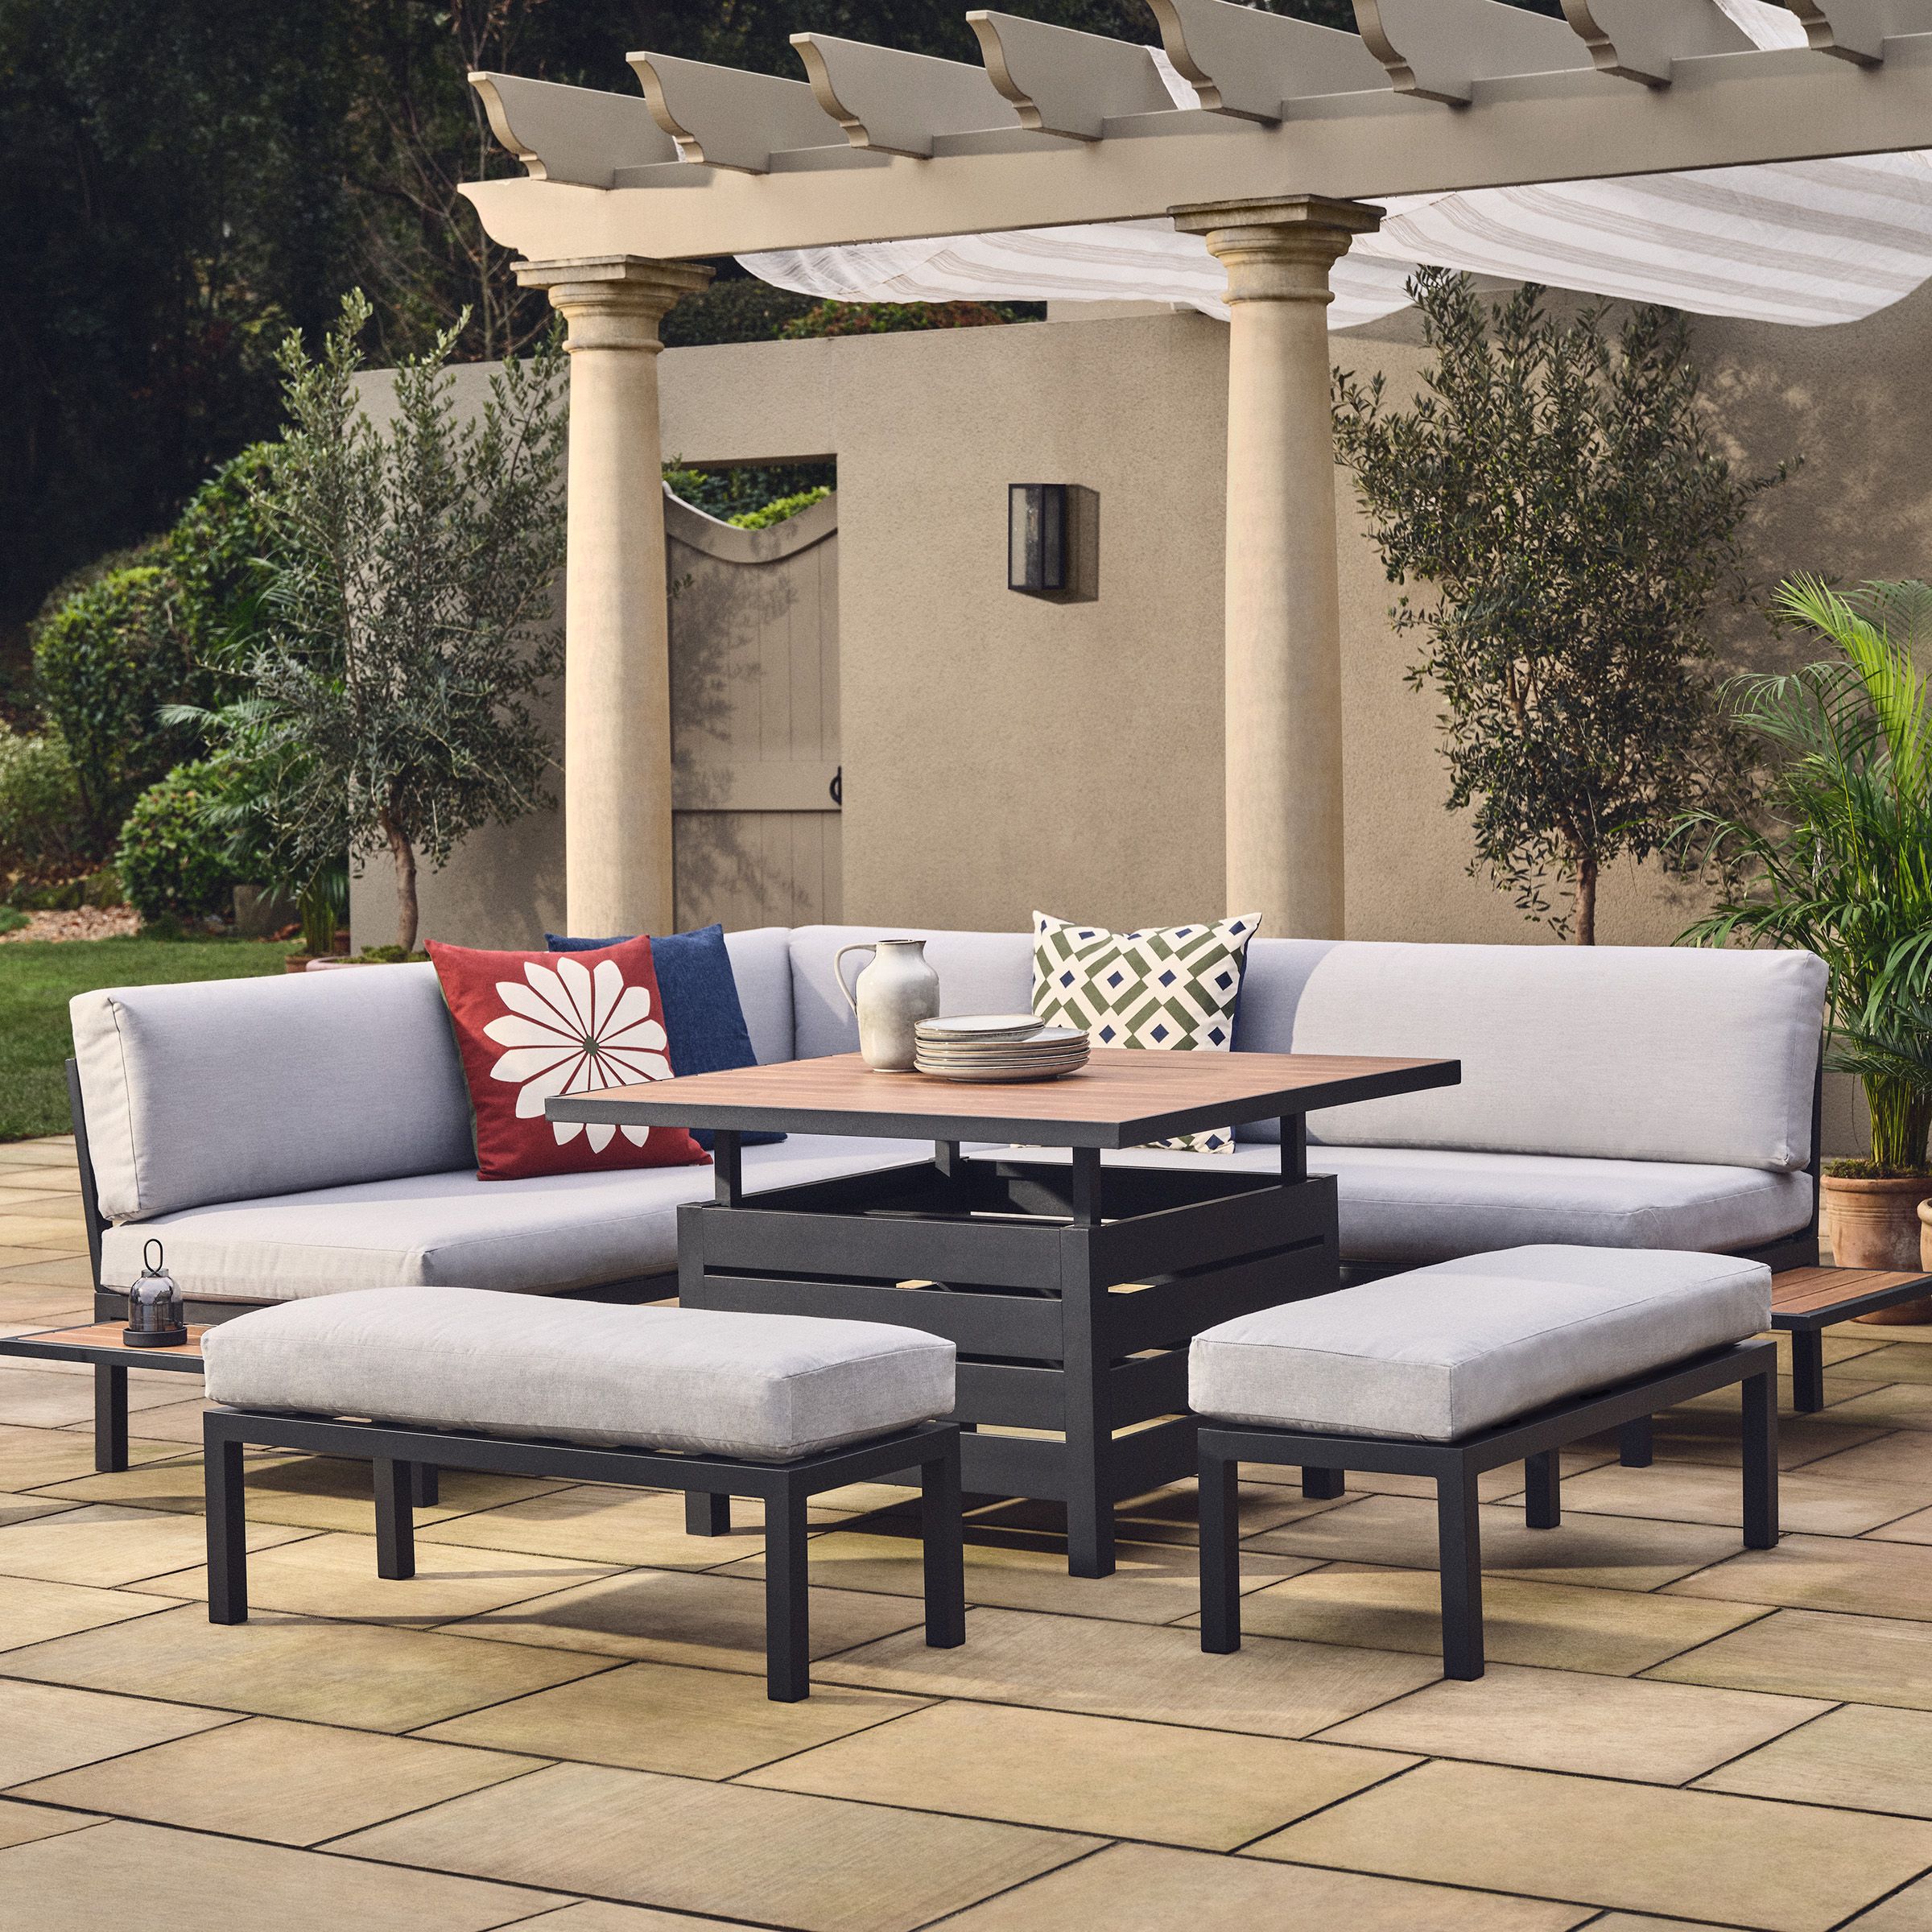 Conservatory furniture - Relax and unwind in an indoor-outdoor space.